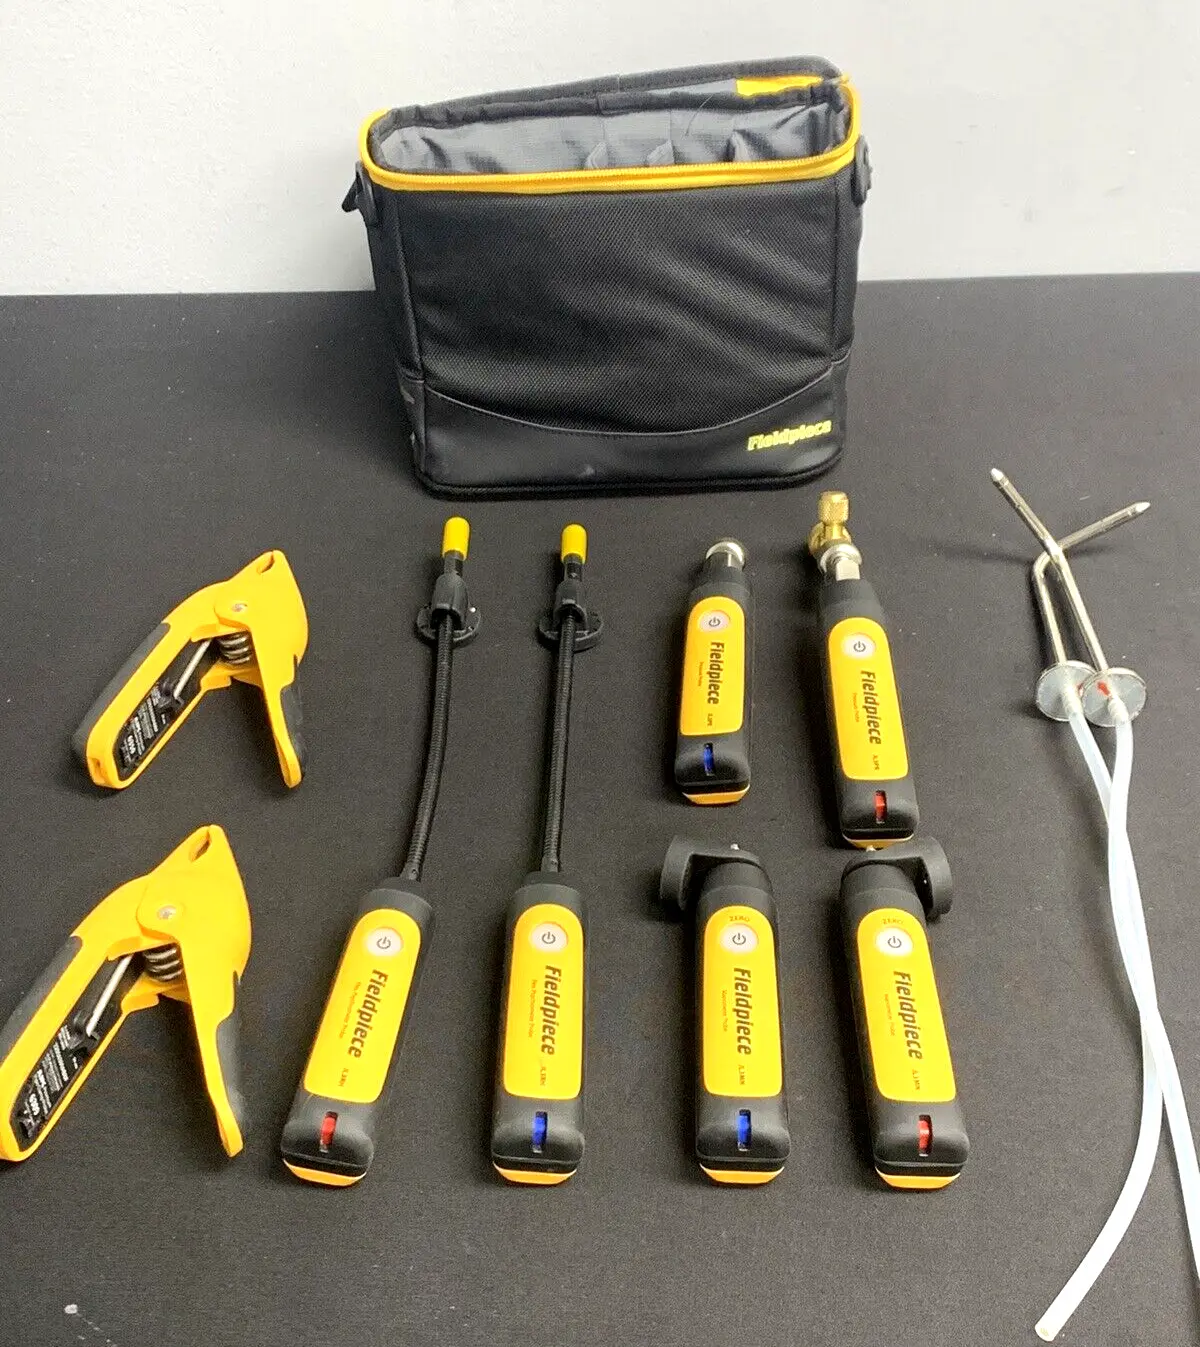 Fieldpiece Job Link® 8pc Charge & Air Kit W/ Probes + Carry Case- Tested!